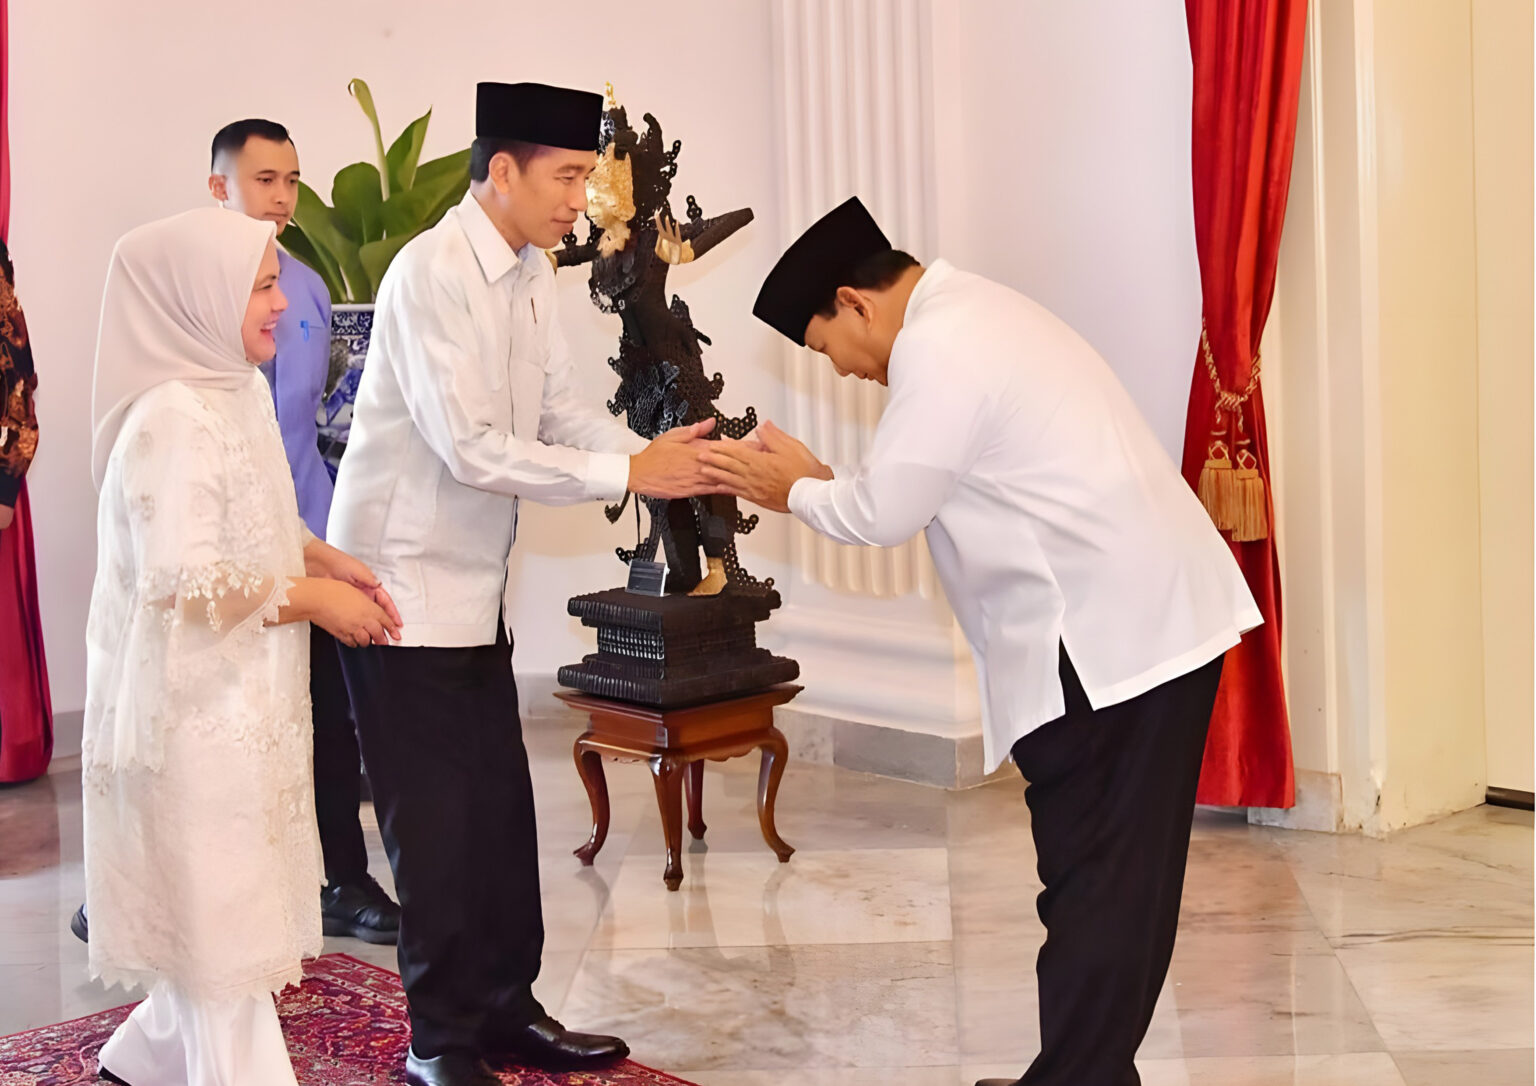 On the Second Day of Eid, Prabowo Subianto Shares Breakfast with Jokowi at the State Palace